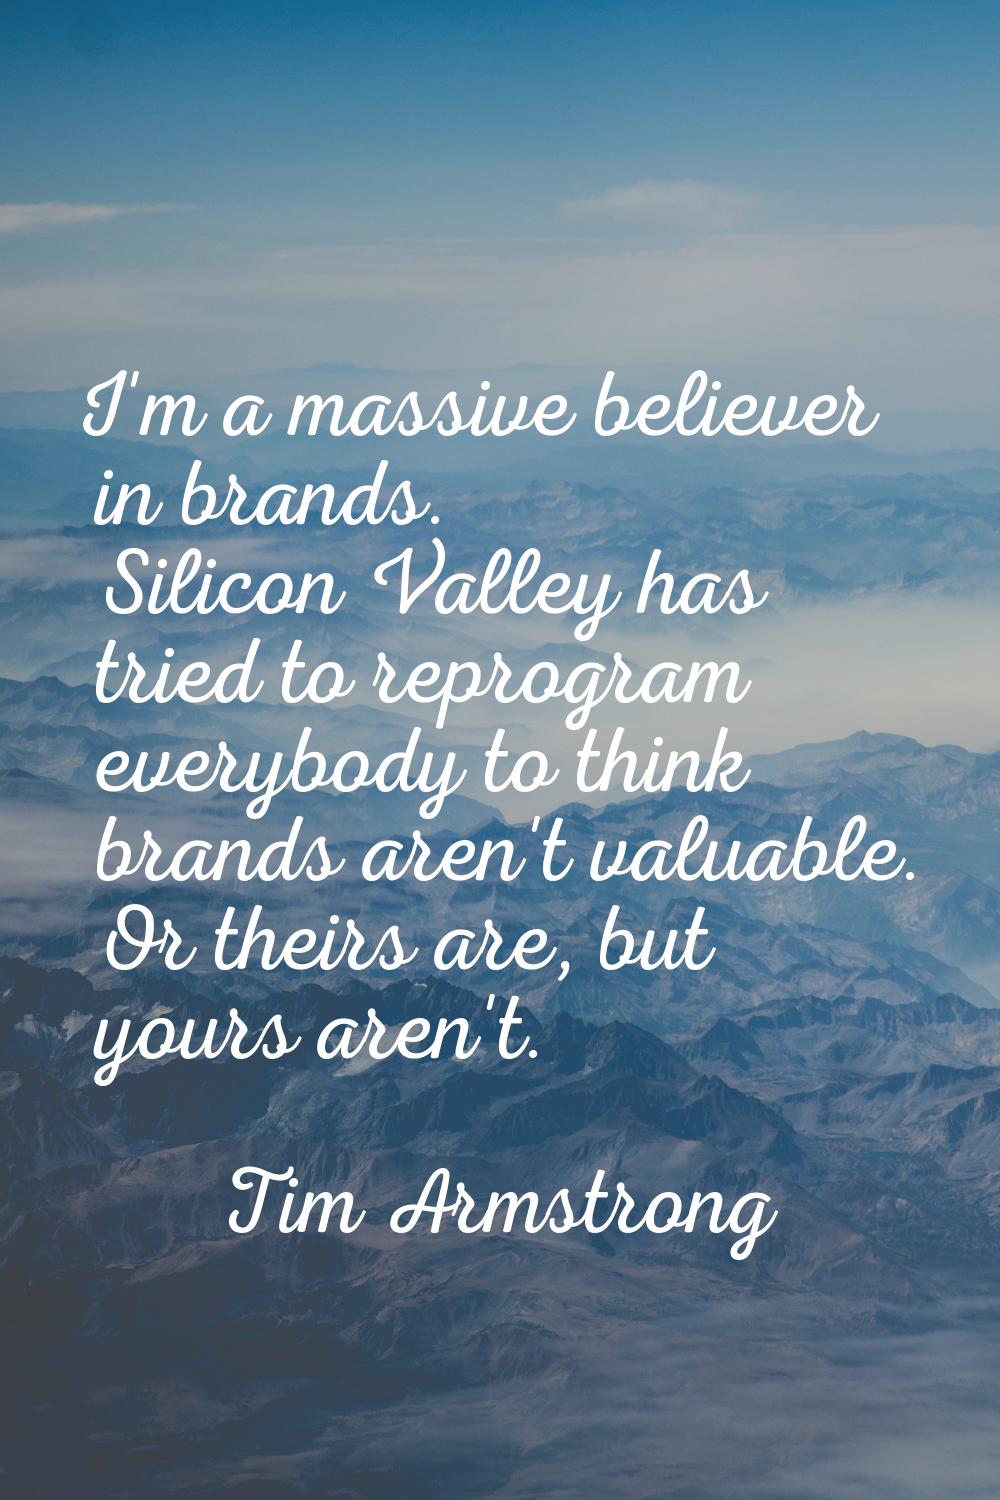 I'm a massive believer in brands. Silicon Valley has tried to reprogram everybody to think brands a